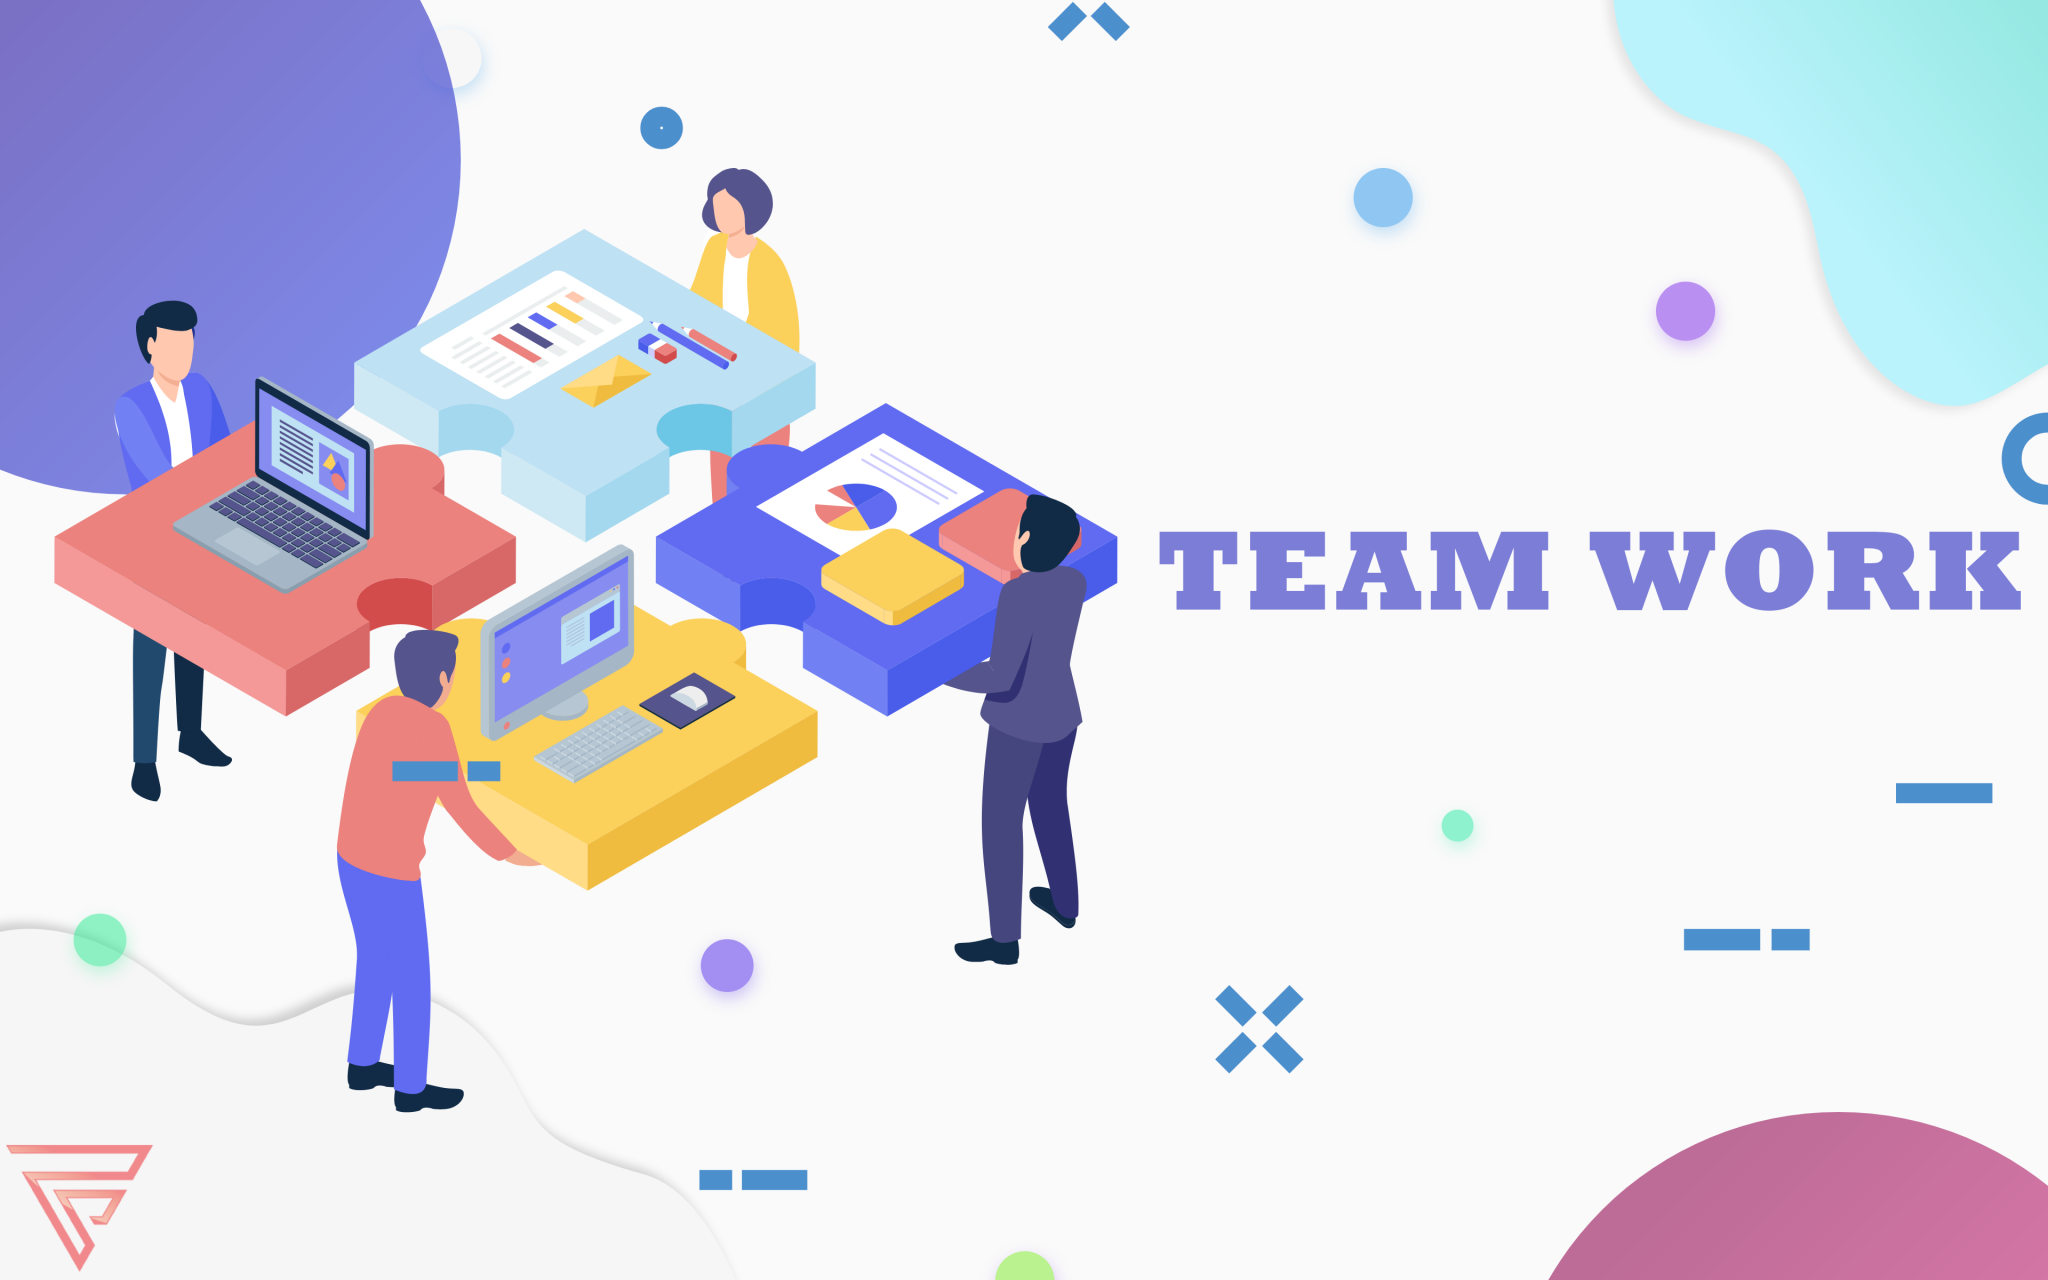 Team work – the key to success